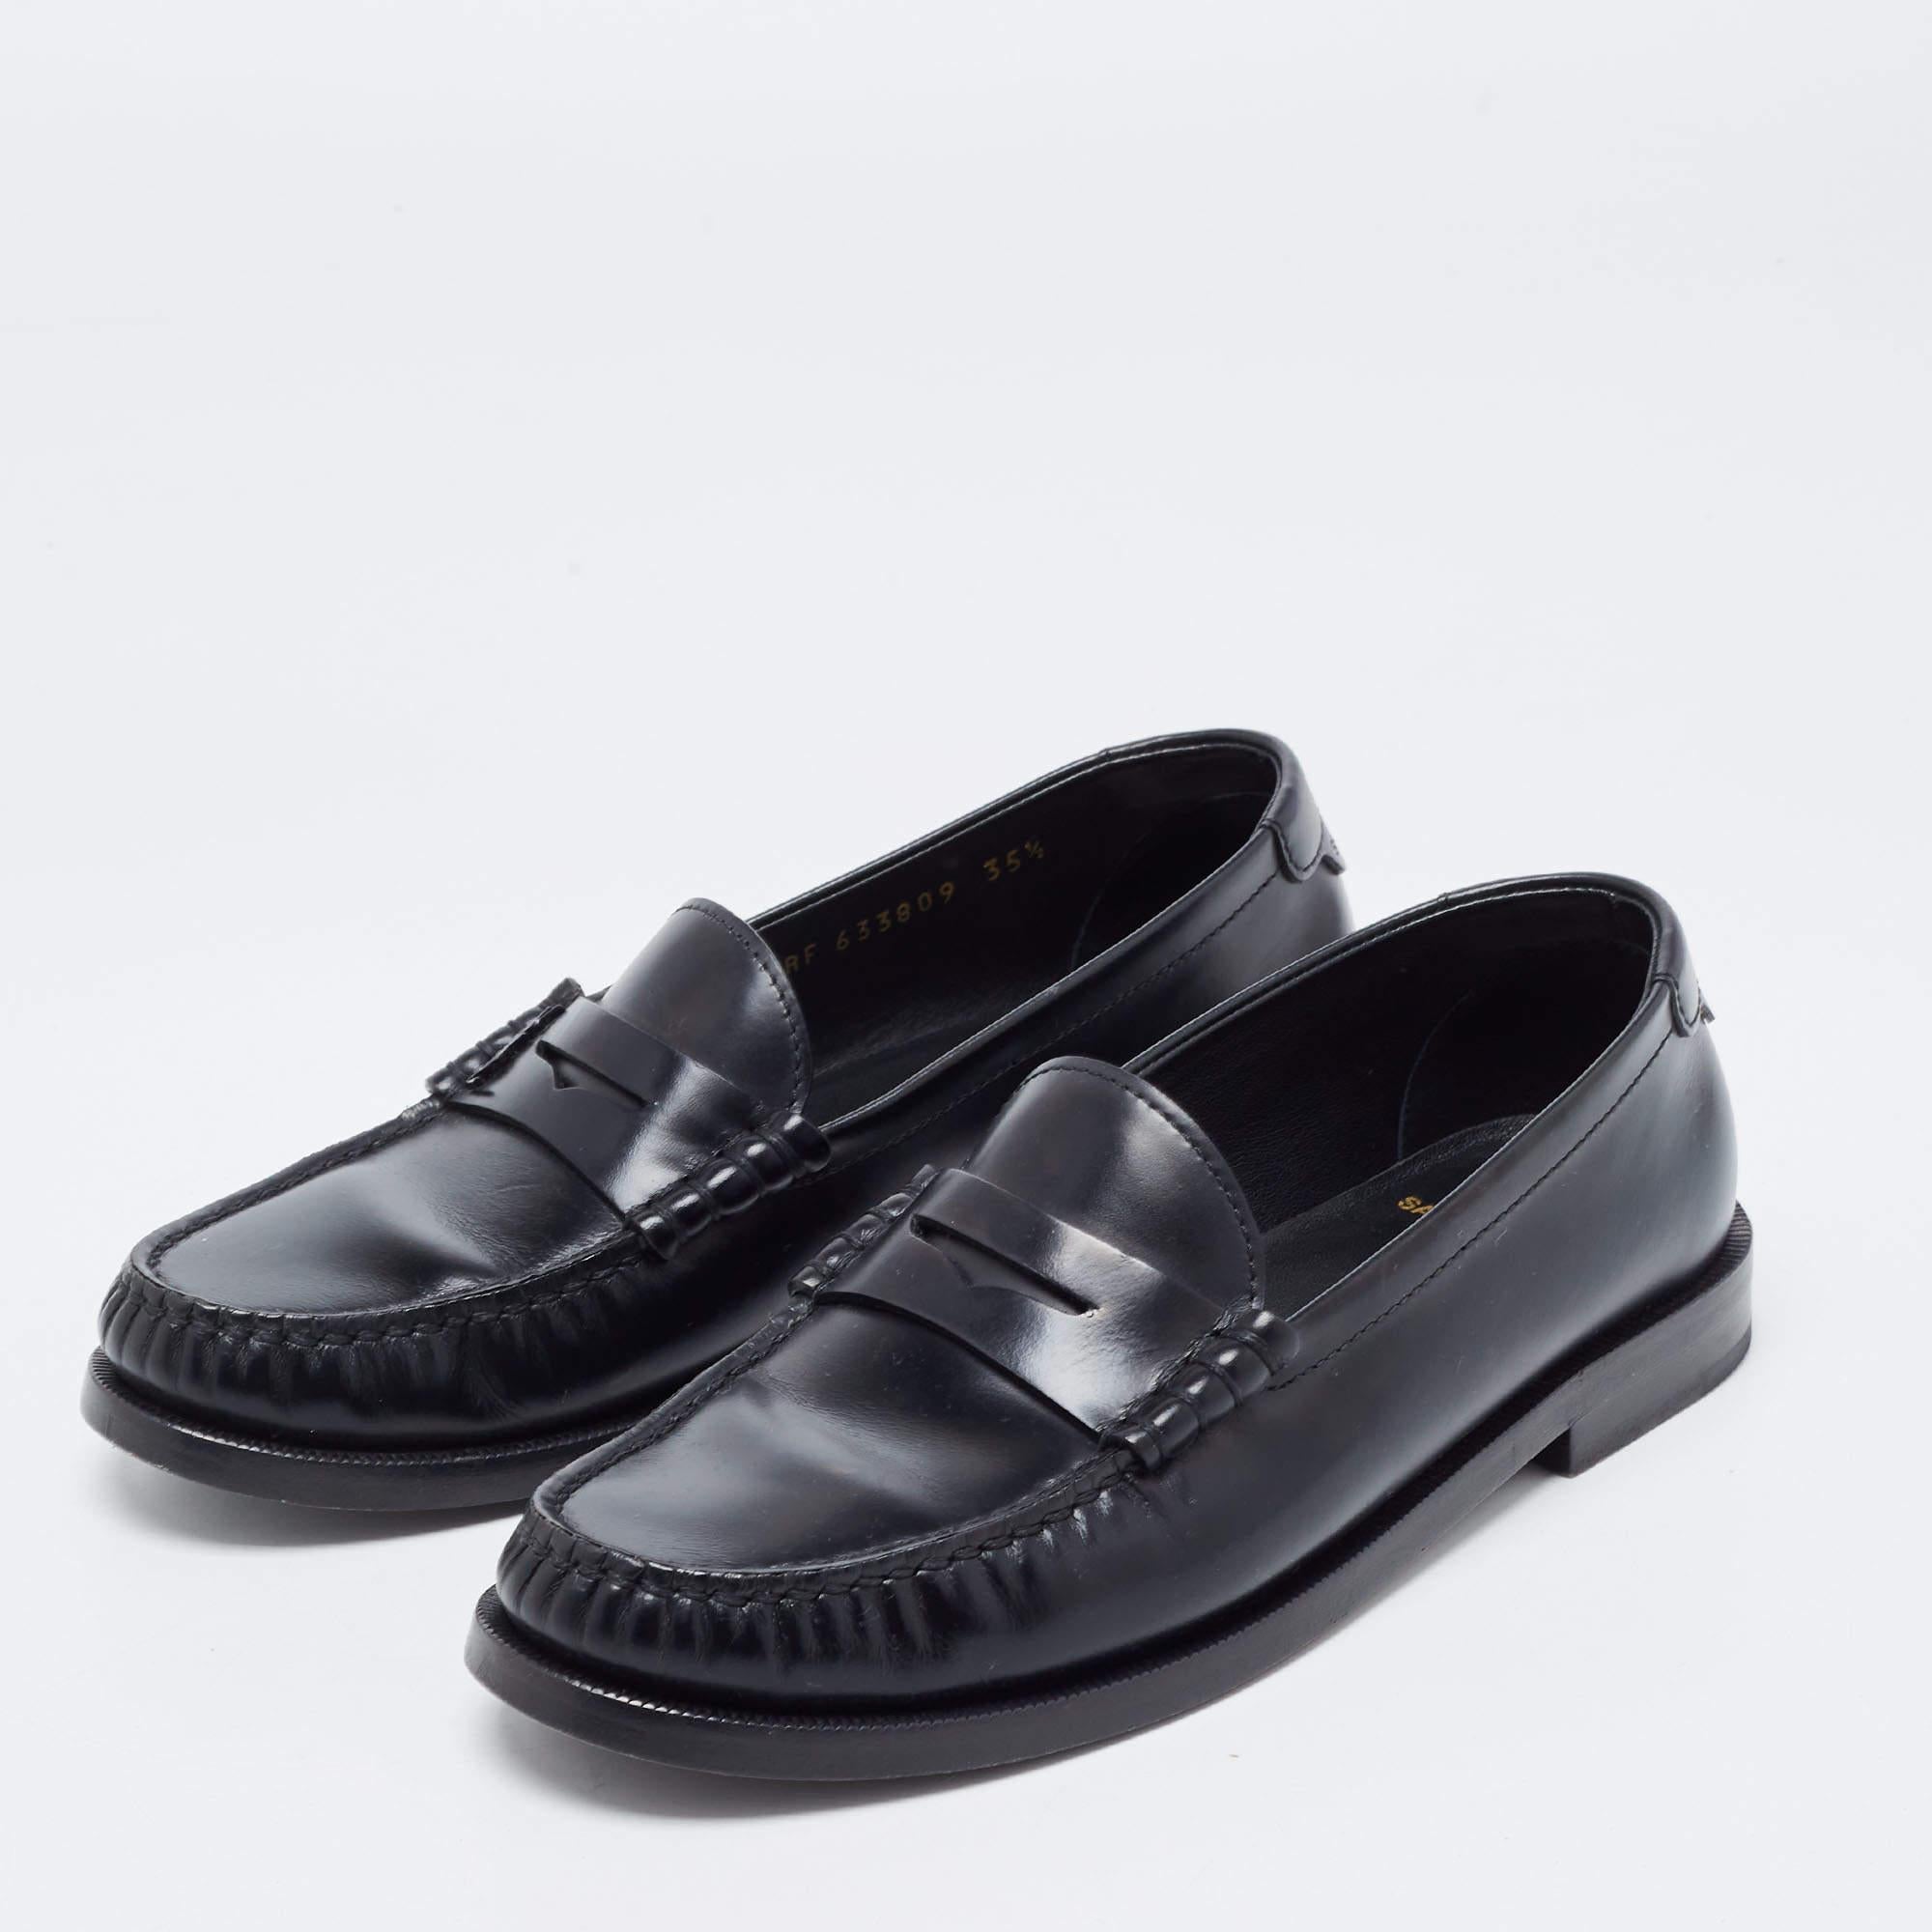 Stylish and super comfortable, this pair of loafers by Saint Laurent will make a great addition to your shoe collection. They have been crafted from leather and styled in a classy black shade. Leather insoles and rubber outsoles beautifully complete